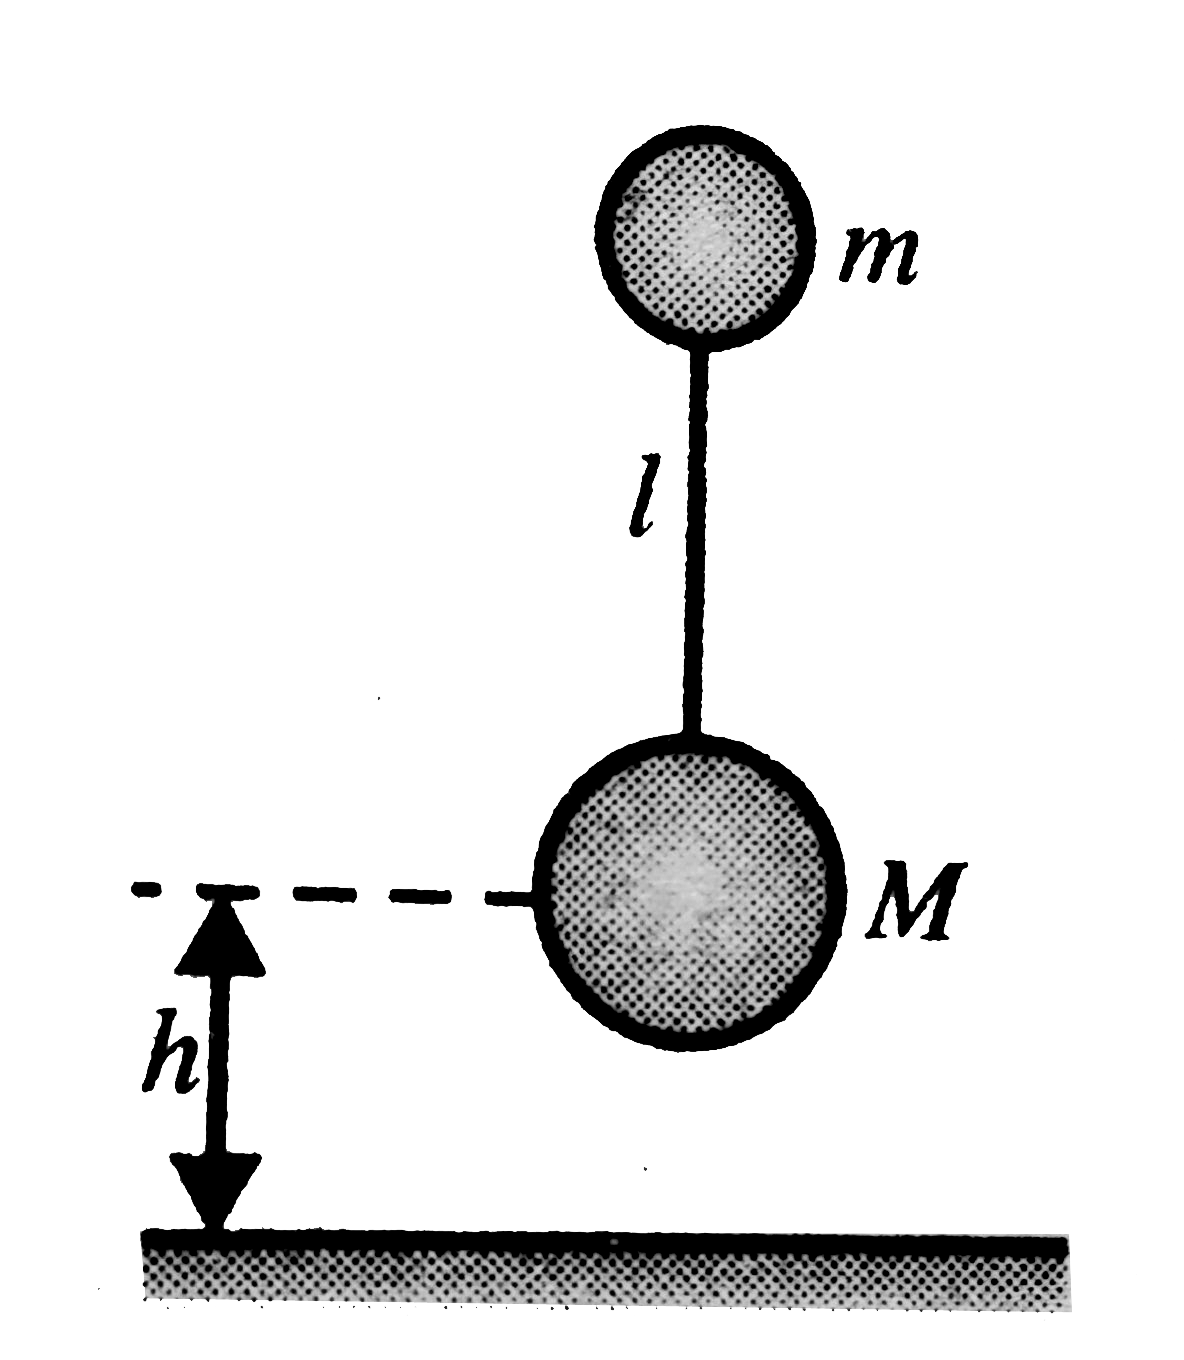 A small ball of mass m is connected by an inextensible massless string of length with an another ball of mass M = 4m. They are released with zero tension in the string from a height h as shown in the figure. Find the time when the string becomes taut for the first time after the mass M collides with the ground. Take all collisions to be elastic.